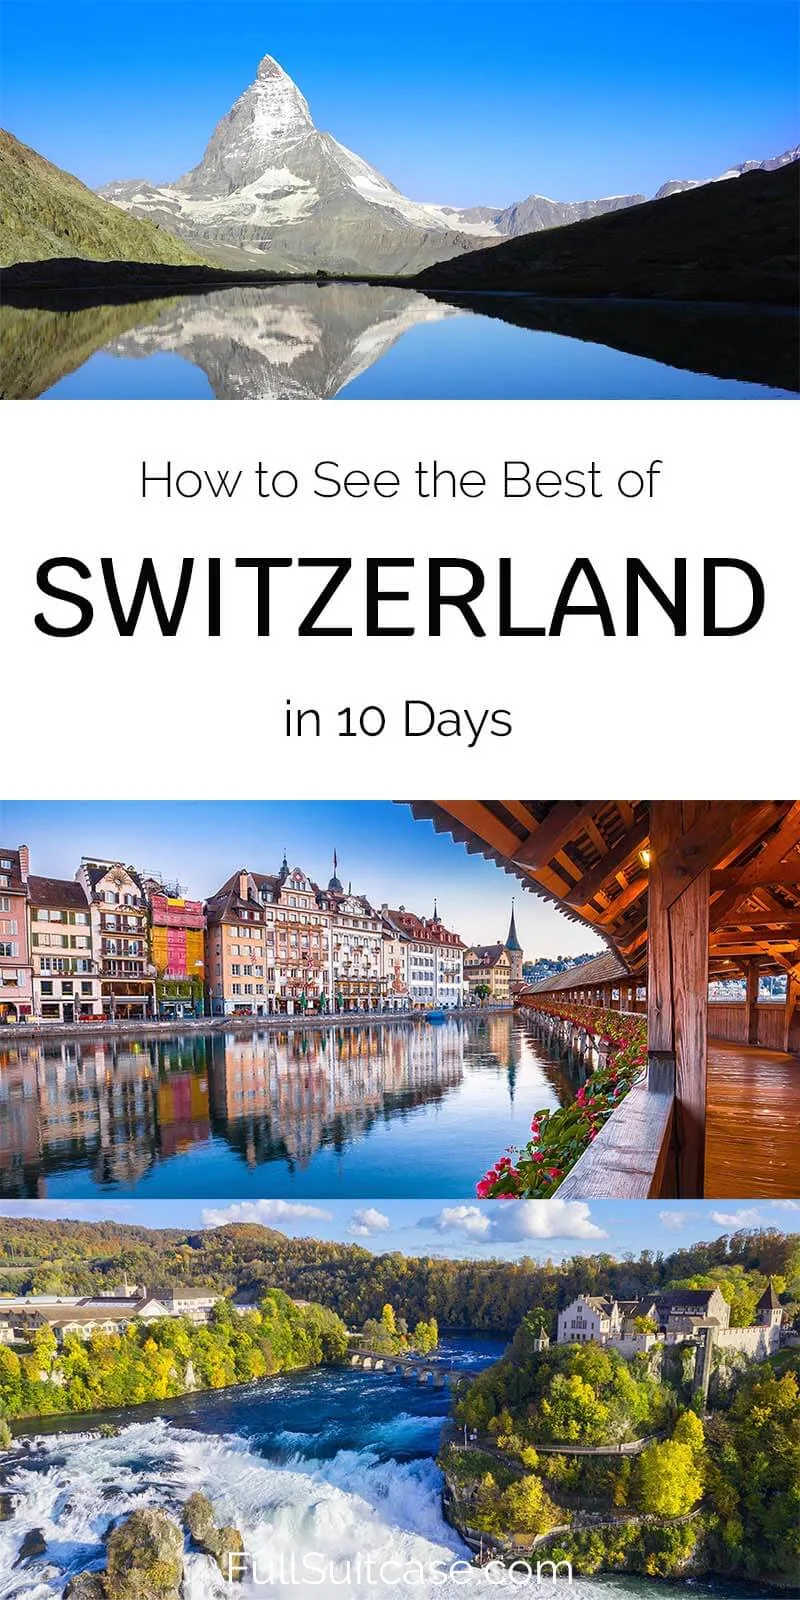 Trip itinerary for the best of Switzerland in 10 days